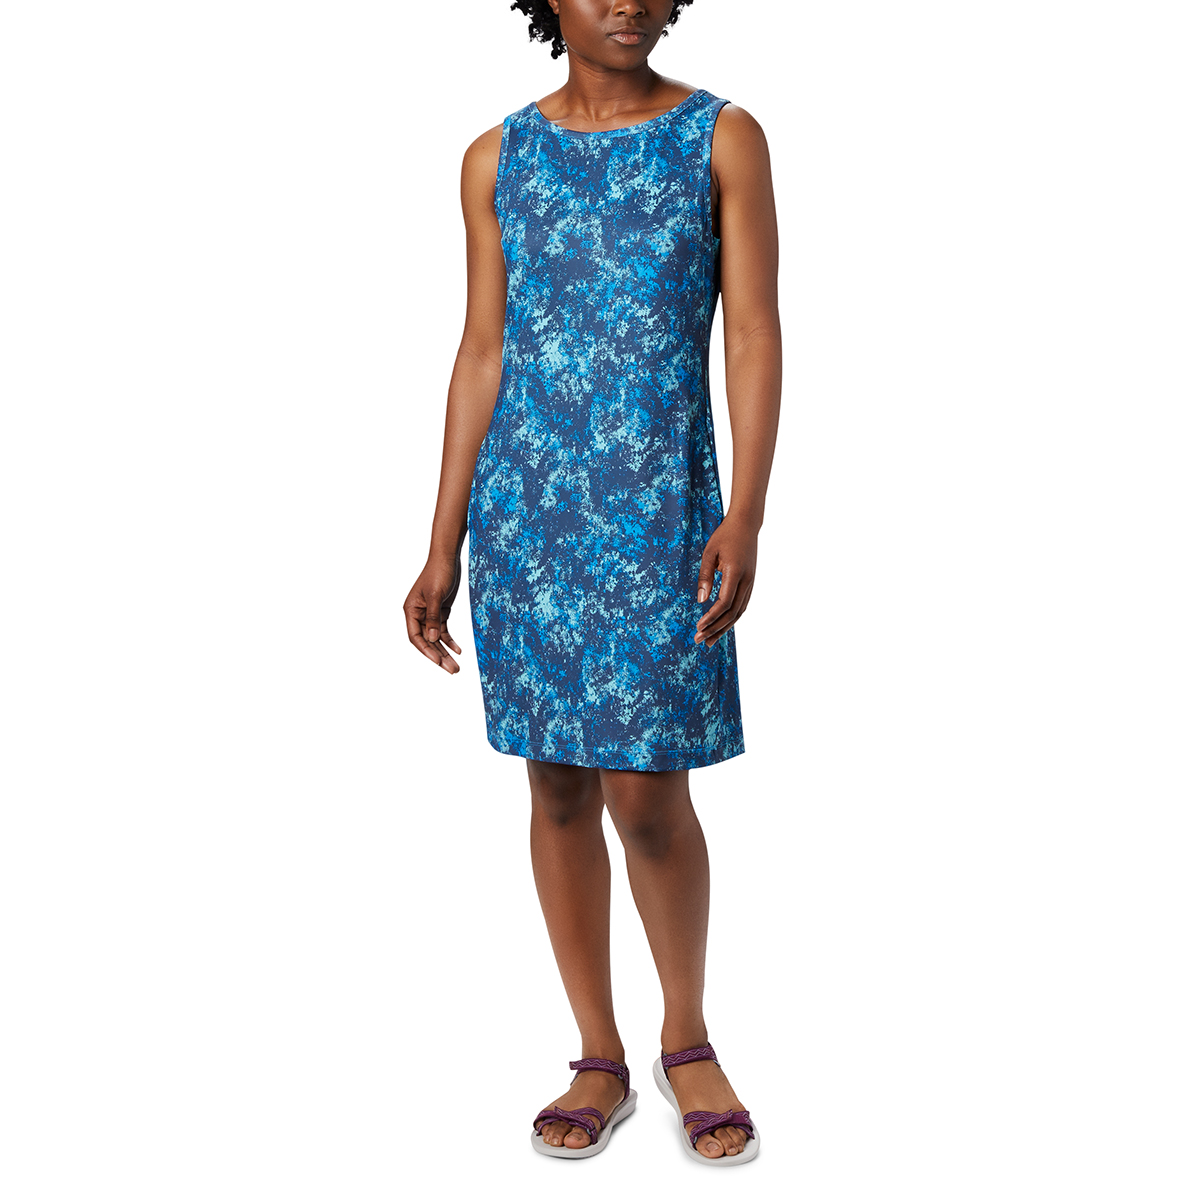 Columbia Women's Chill River Printed Dress - Blue, S